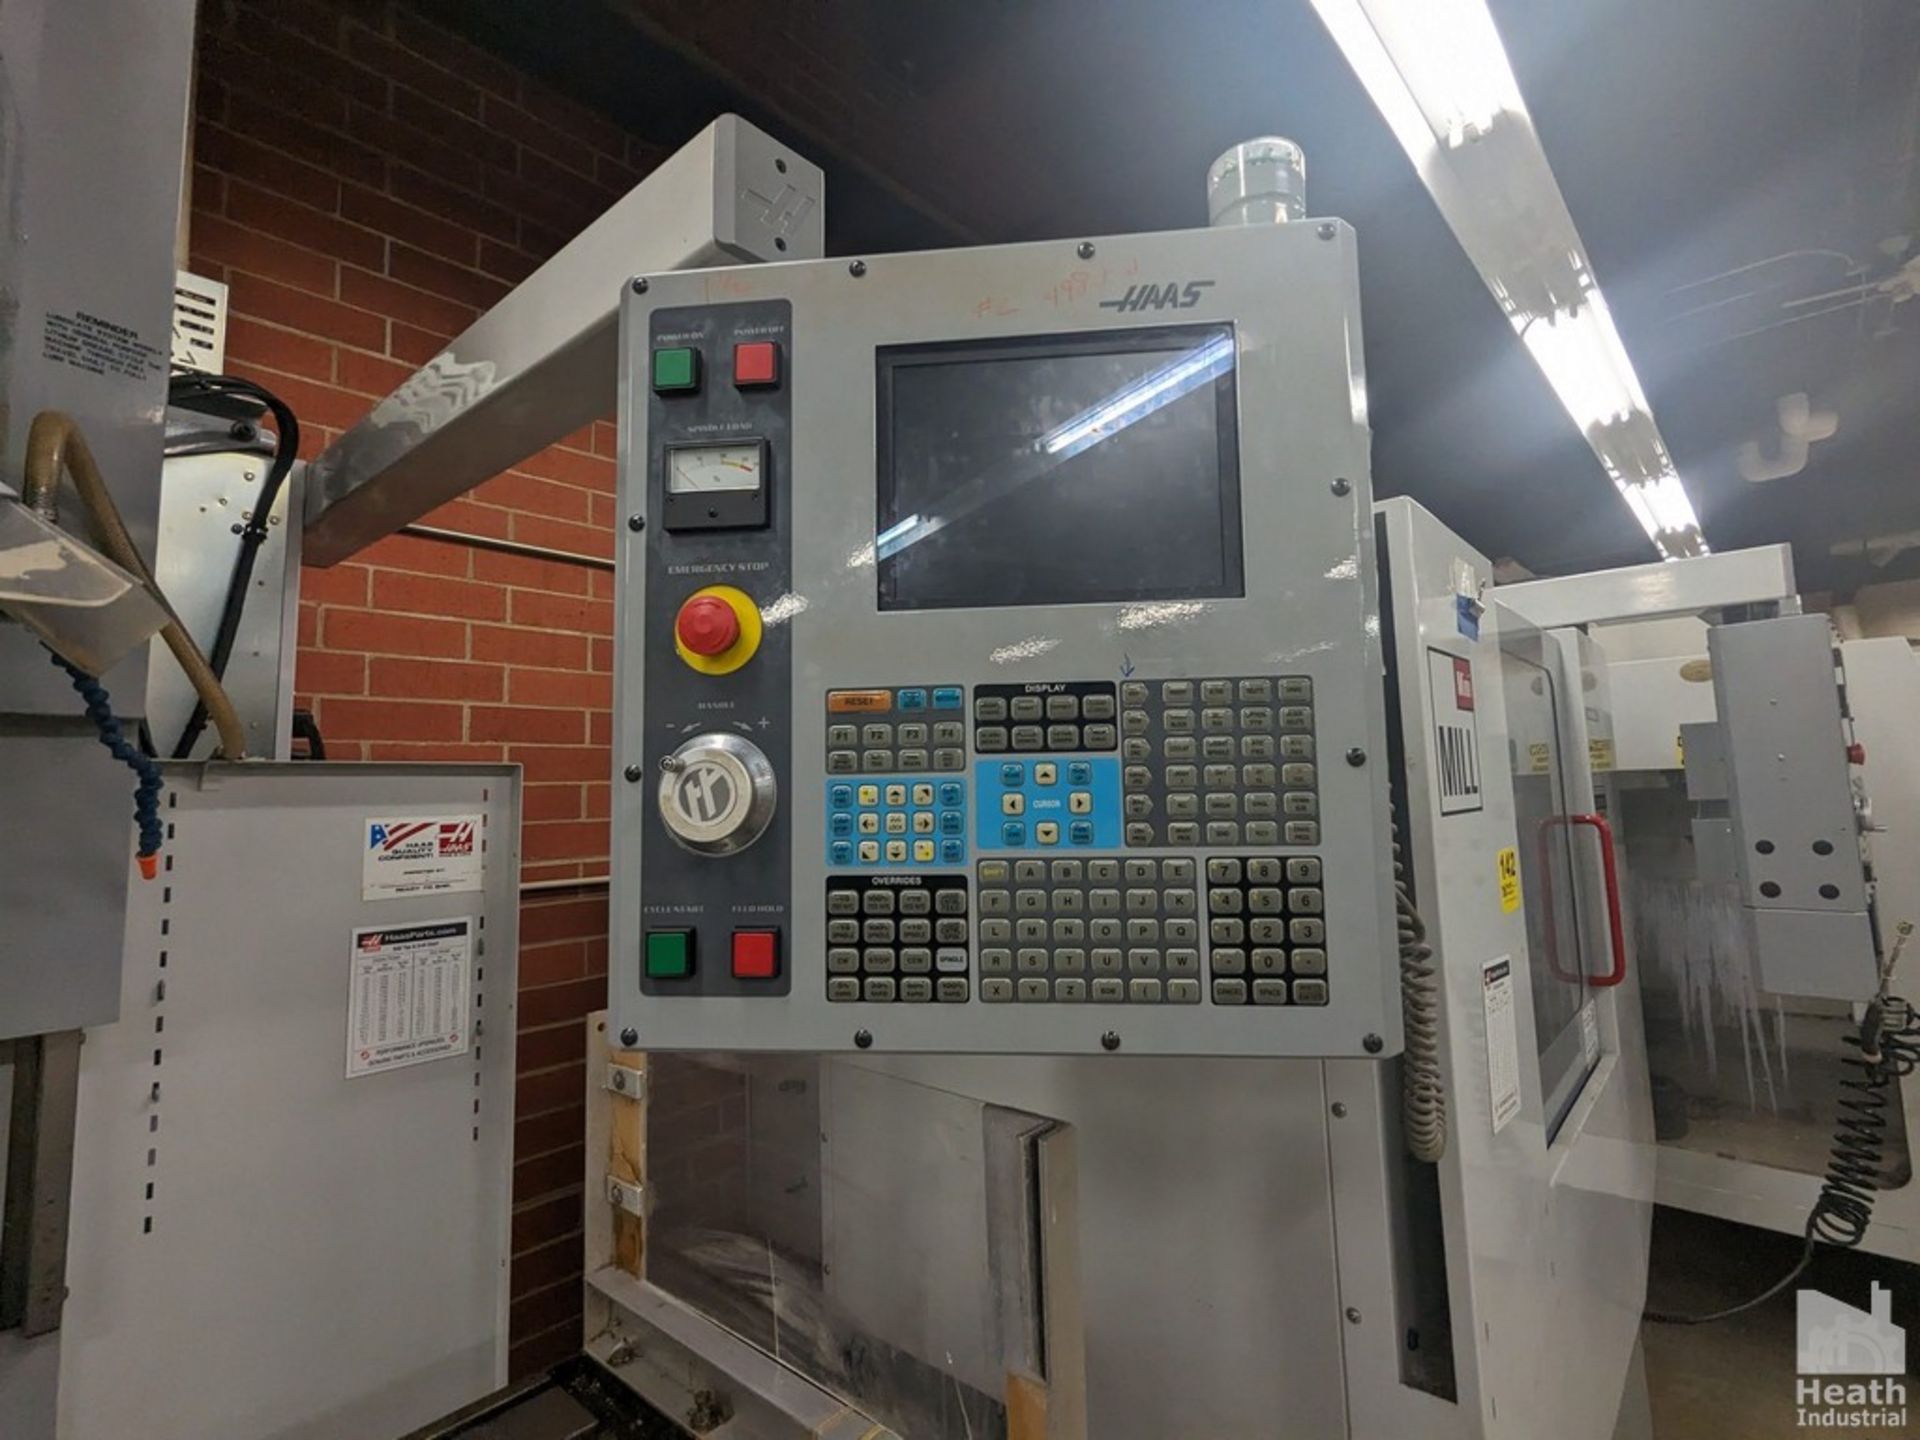 HAAS 3-AXIS MODEL TM-1 CNC VERTICAL MACHINING CENTER, S/N 43825 (NEW 2005) 11"X48" TABLE, 30" X-AXIS - Image 7 of 7